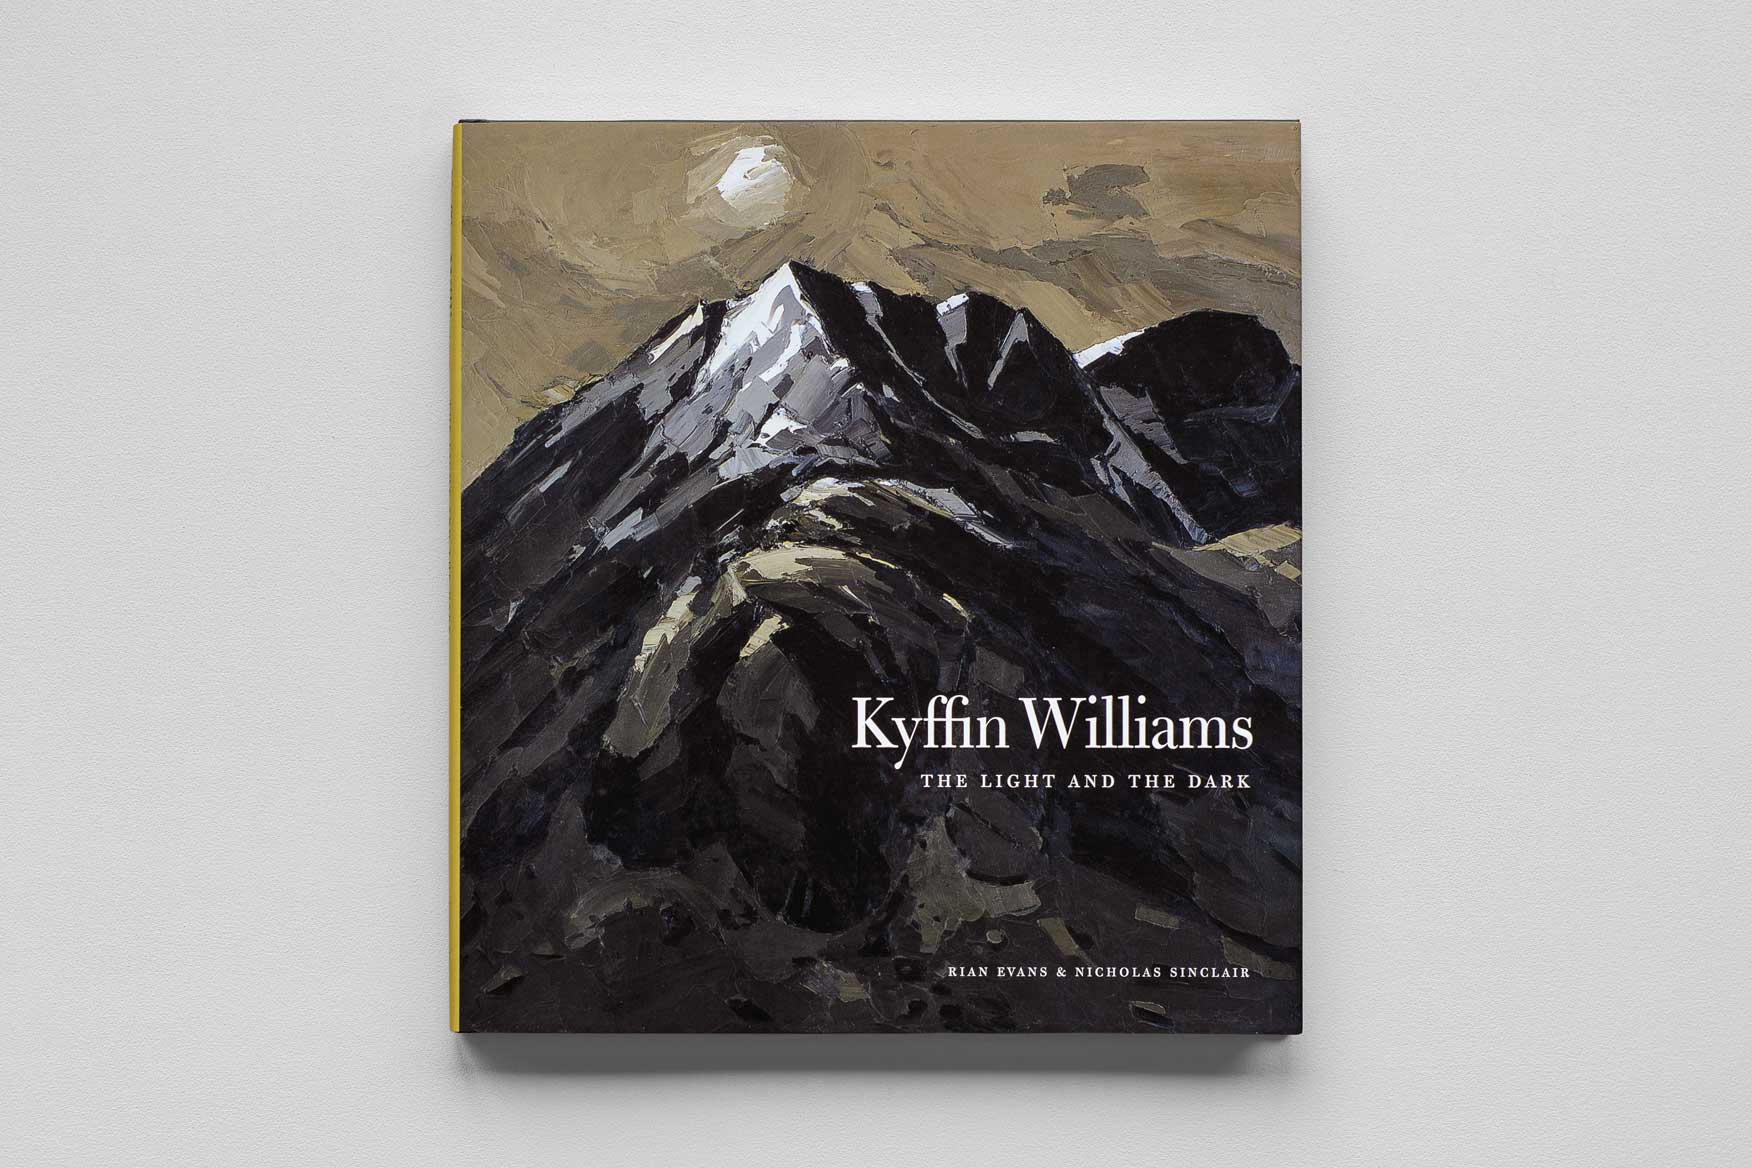 Kyffin Williams: The Light and the Dark